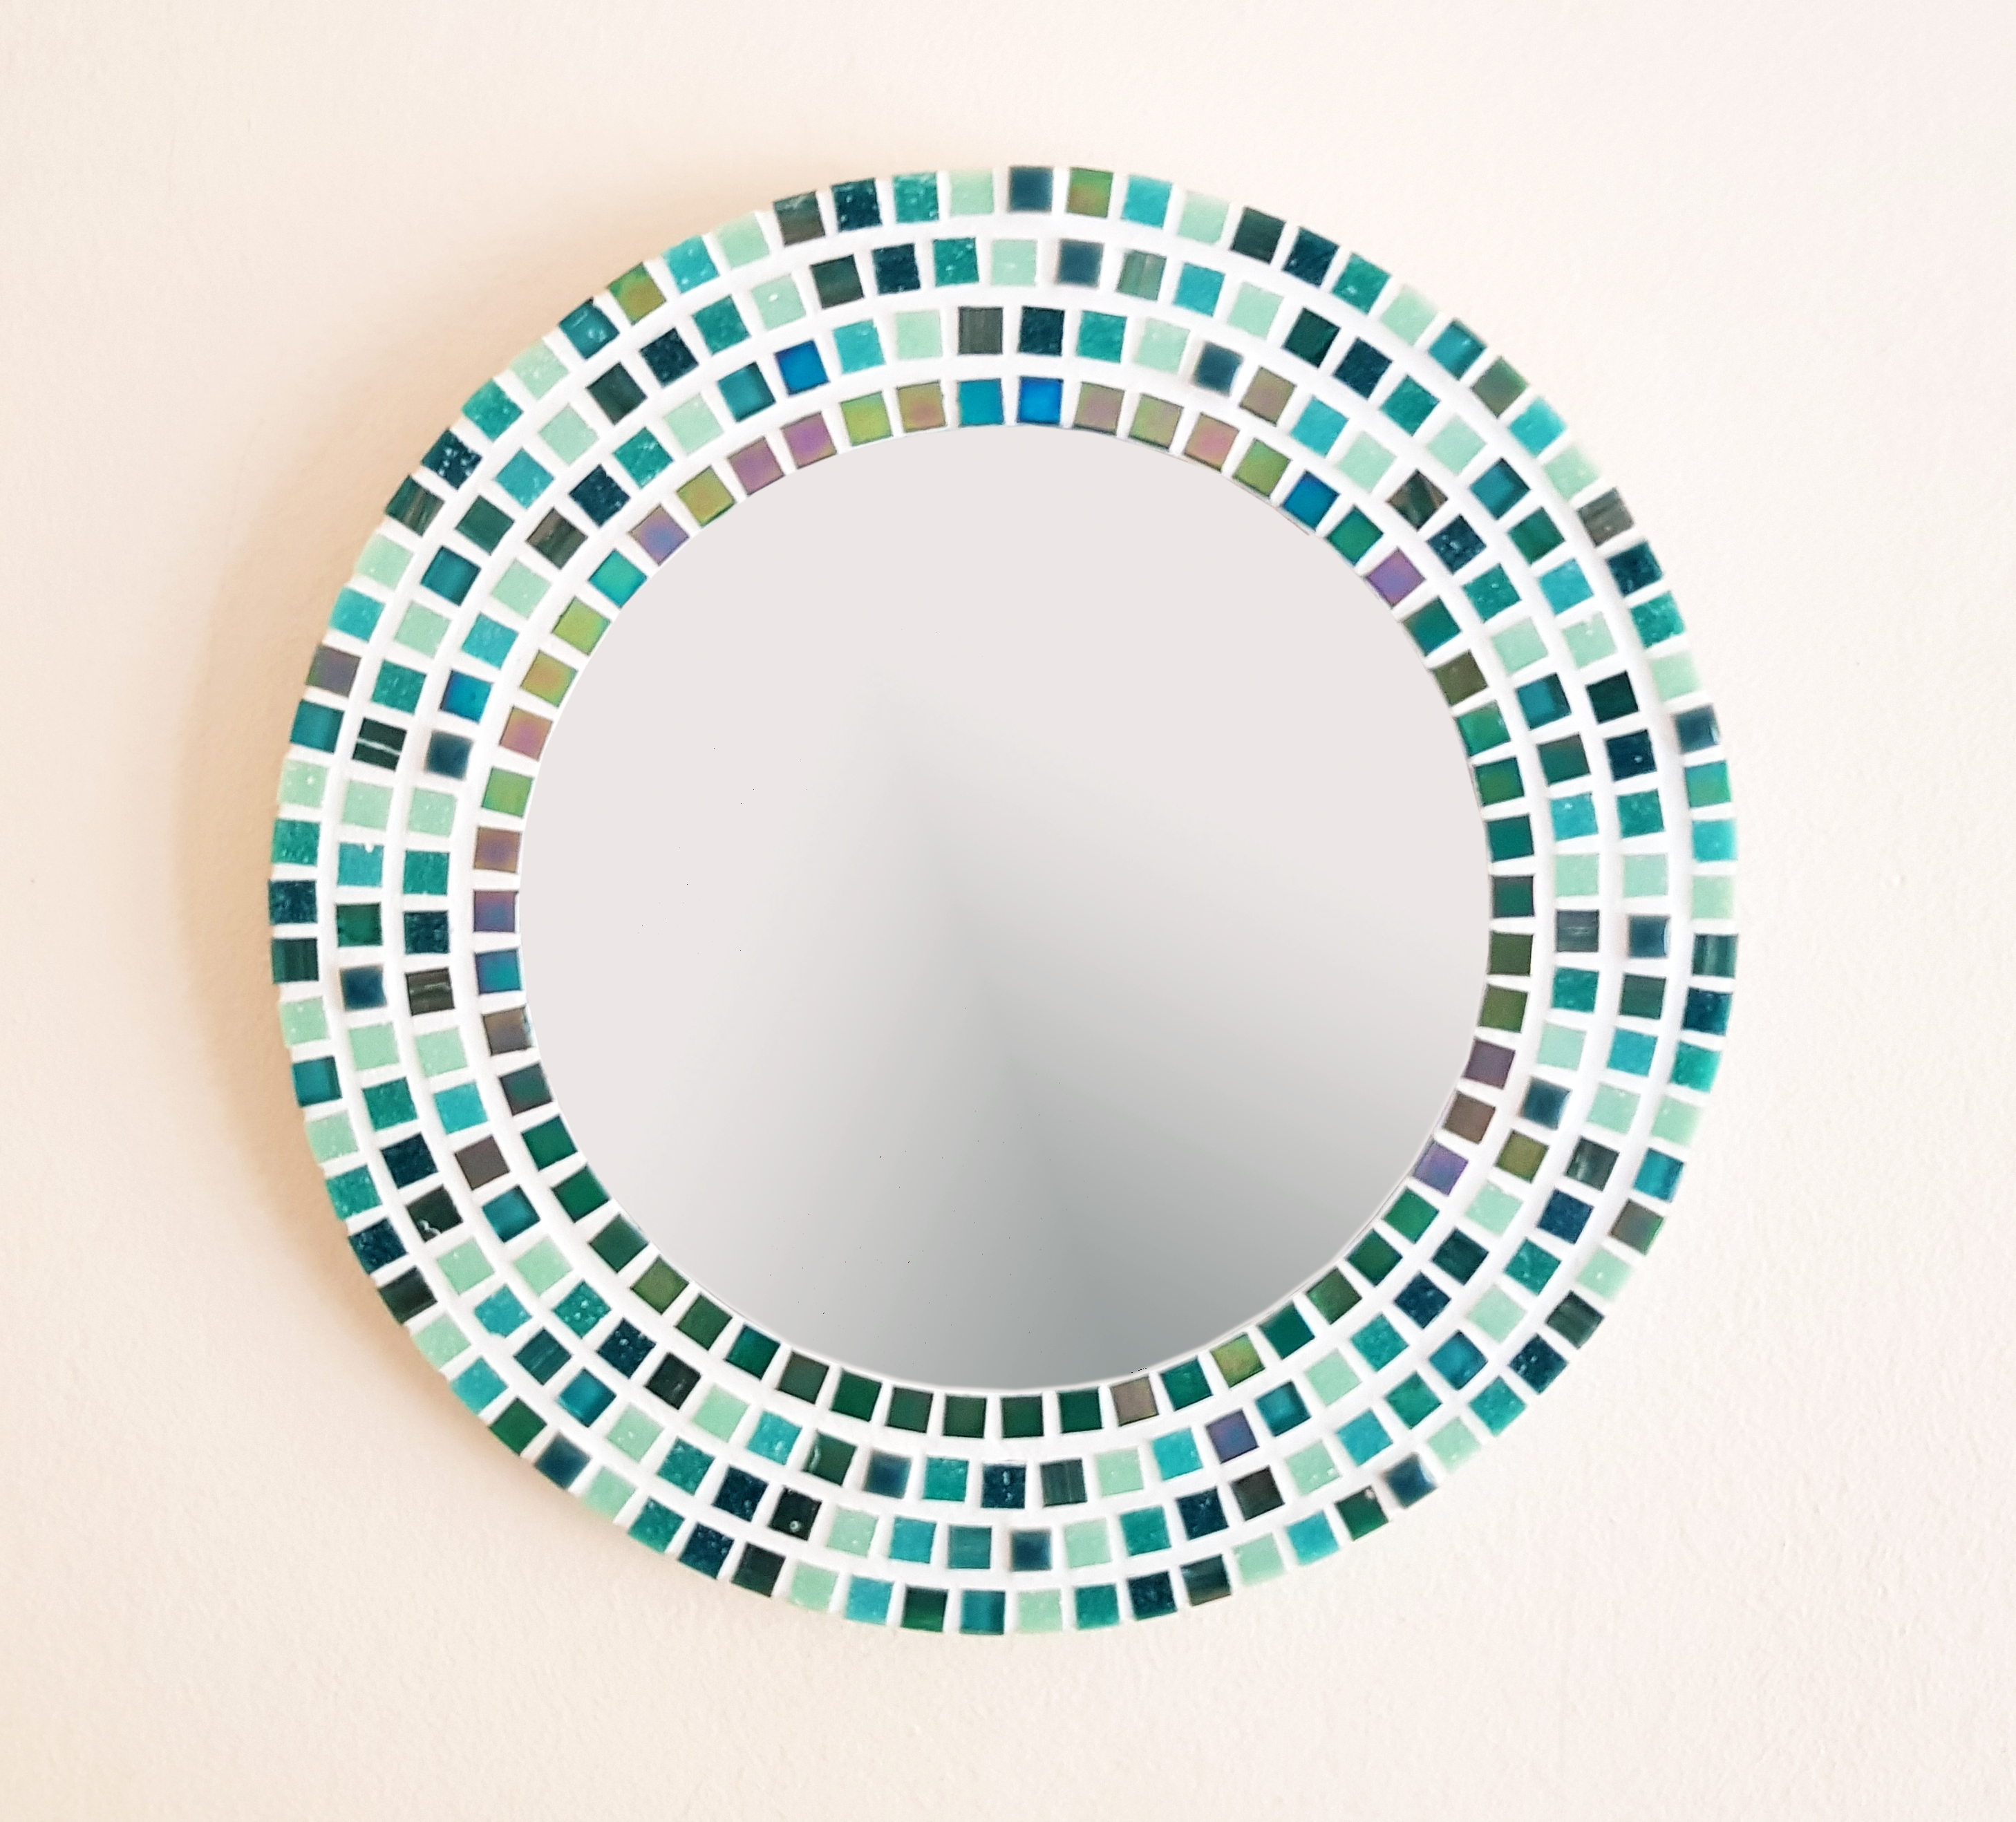 Small Round Mosaic Wall Mirror In, Mosaic Framed Mirrors Uk